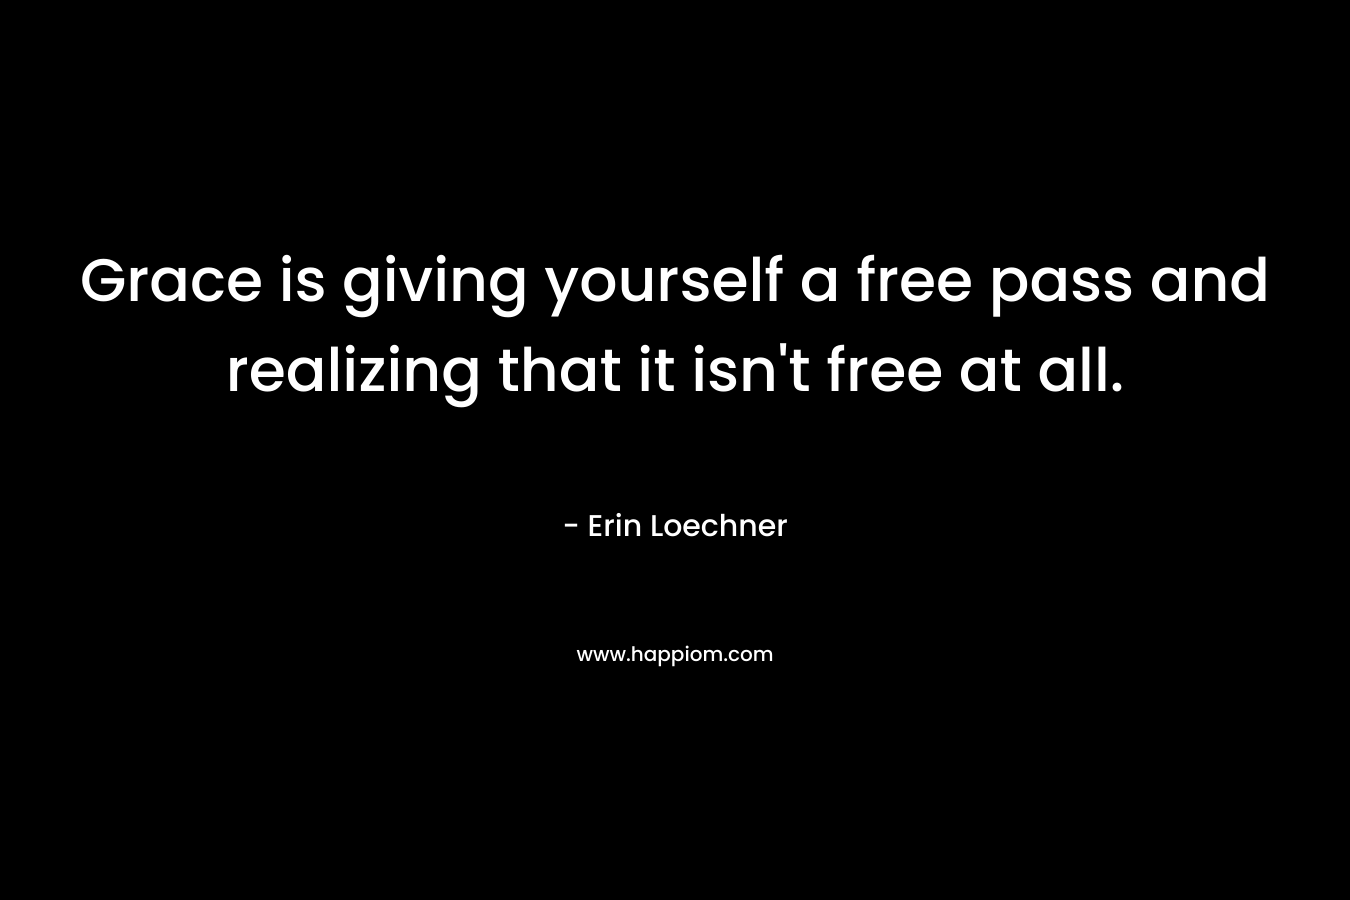 Grace is giving yourself a free pass and realizing that it isn't free at all.